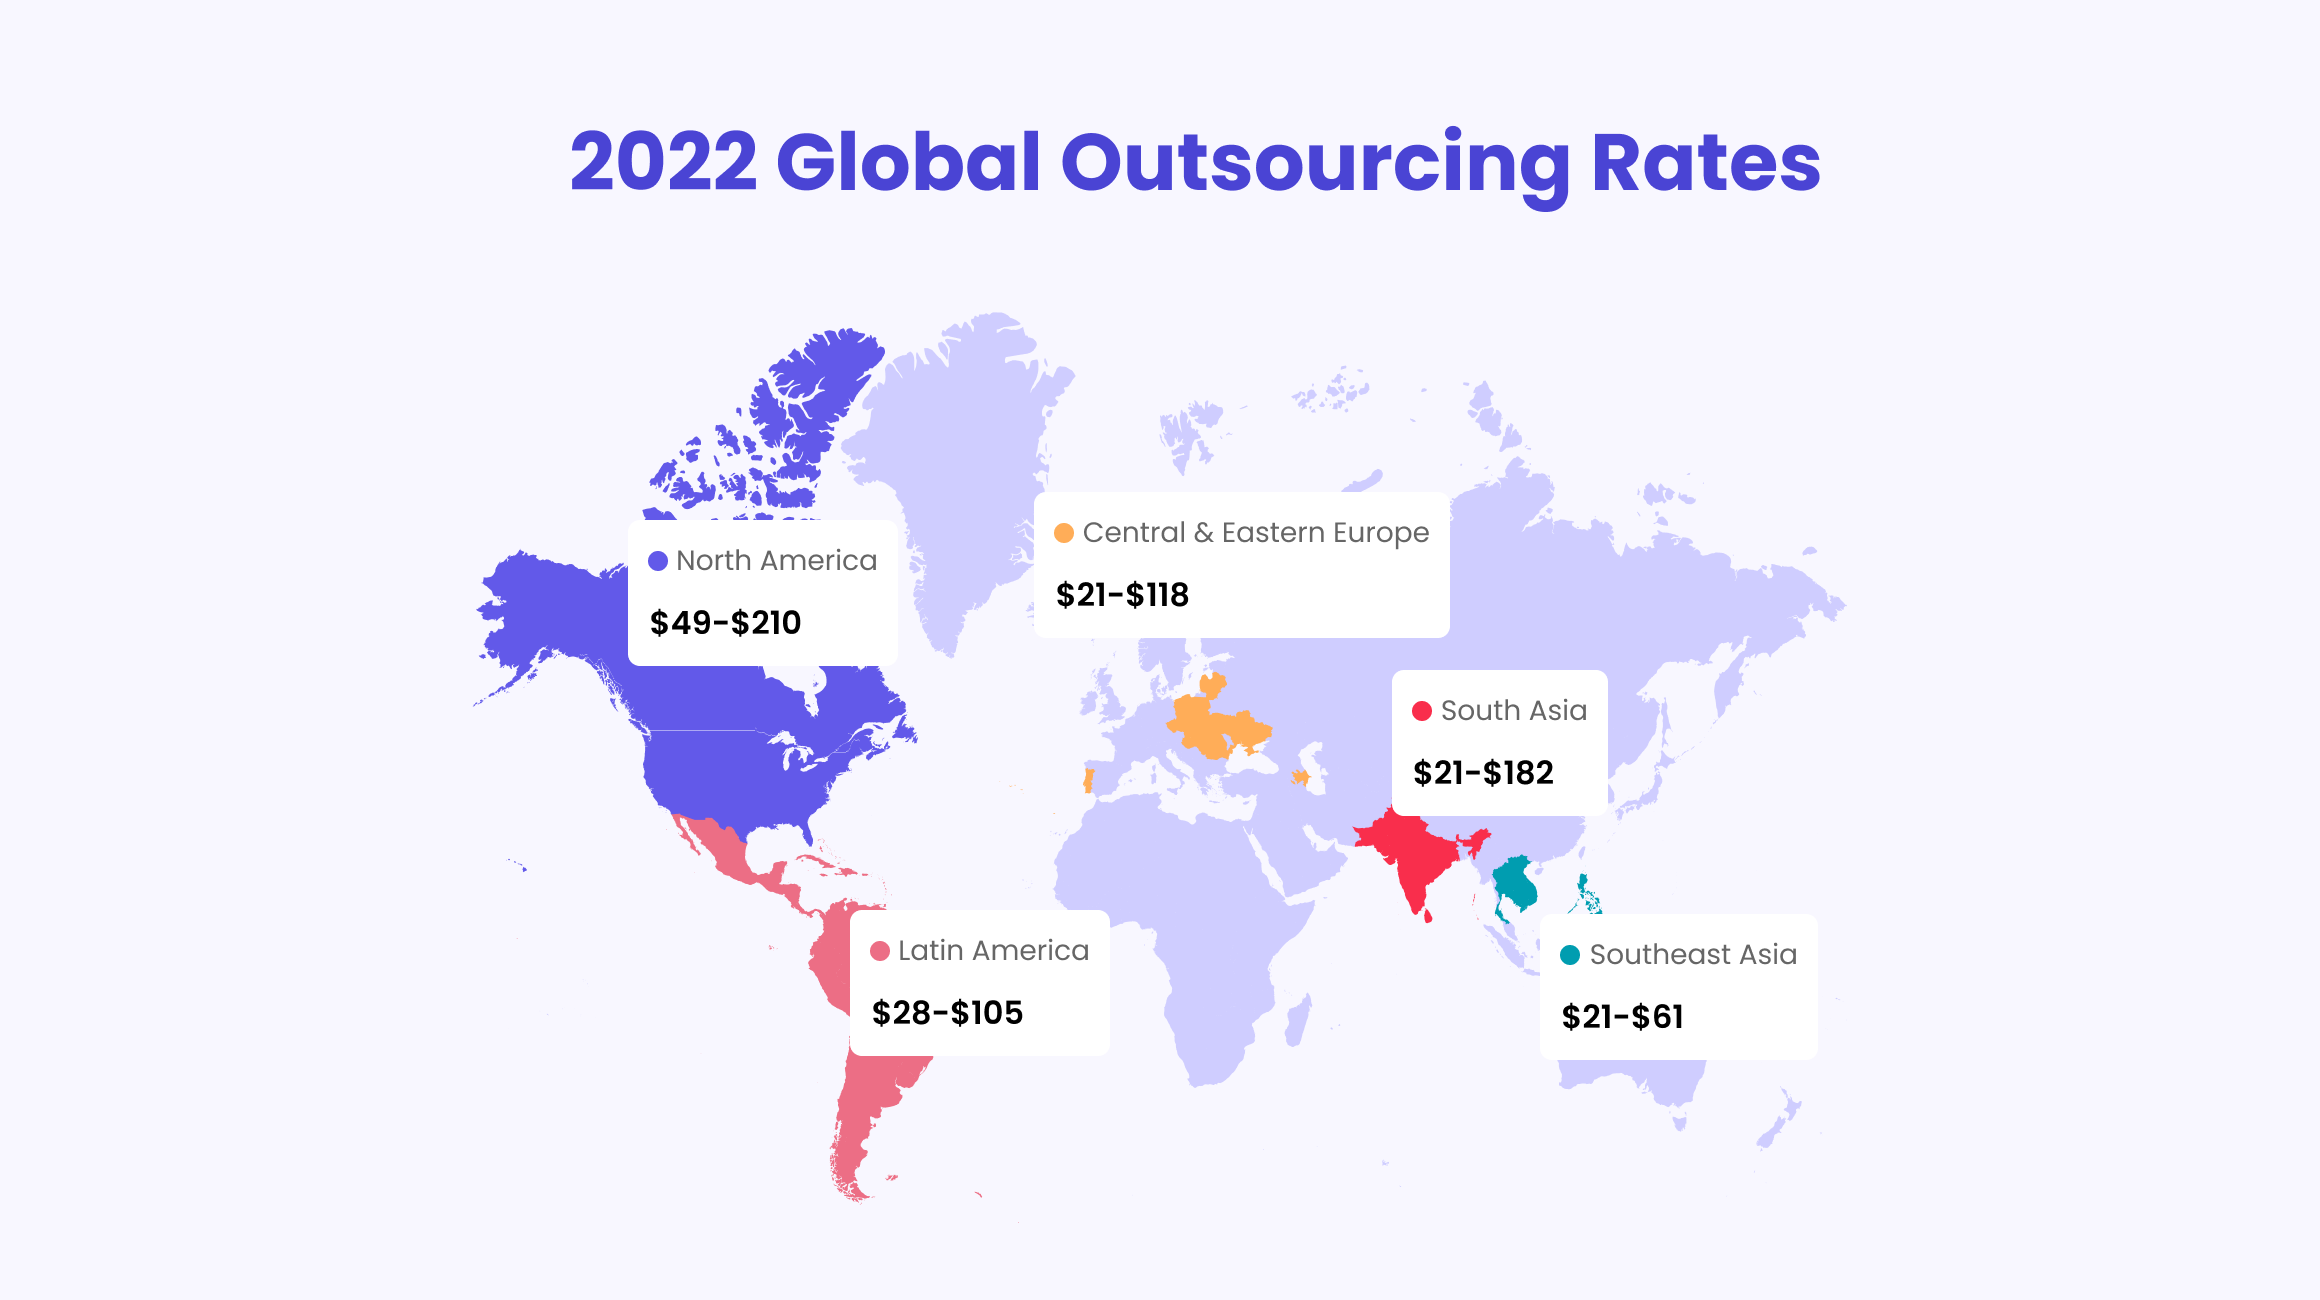 Global outsourcing rates